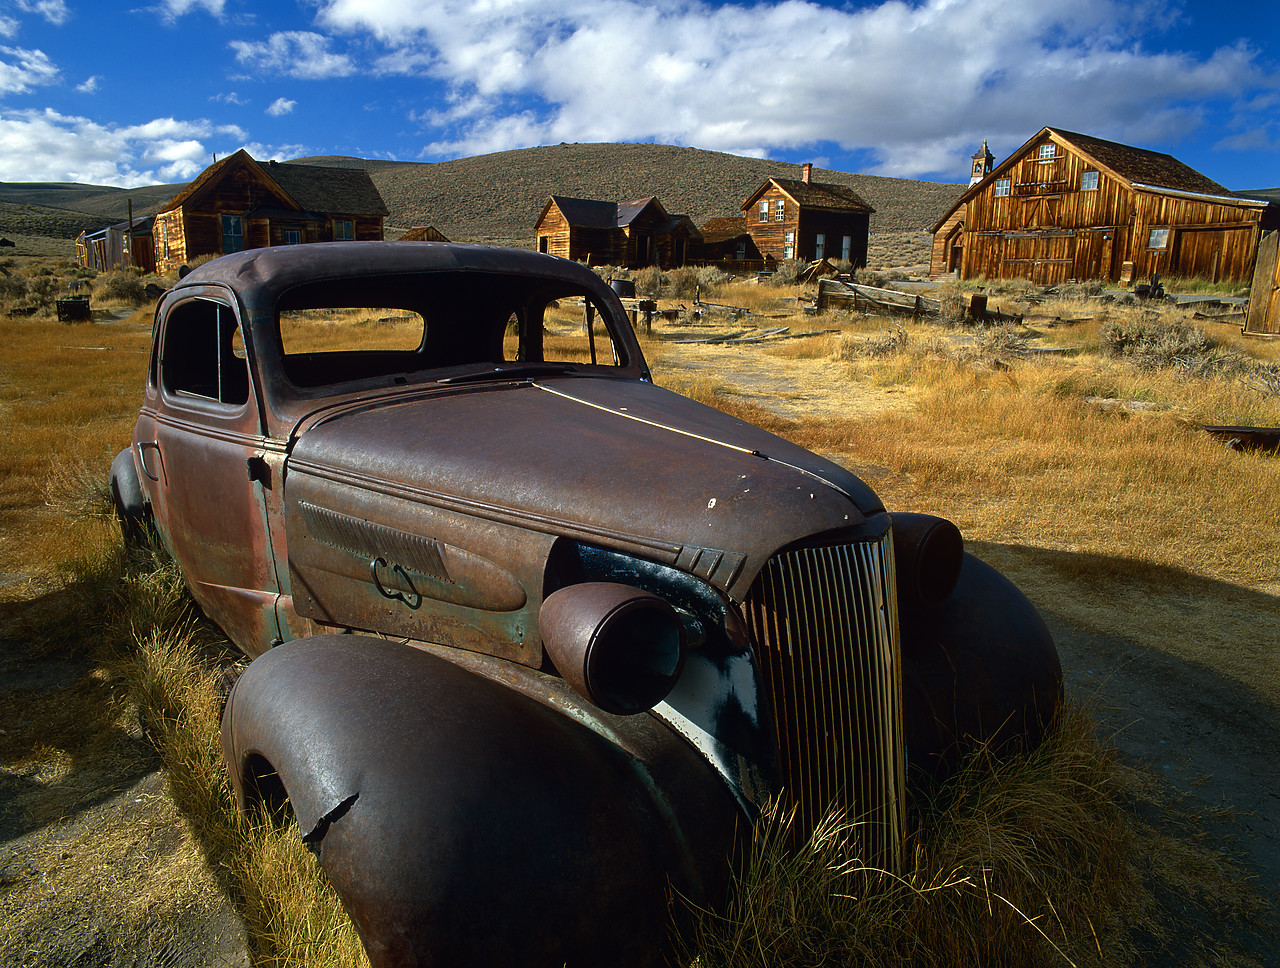 #020751-1 - Rusty Car, Bodie Ghost Town State Park, California, USA